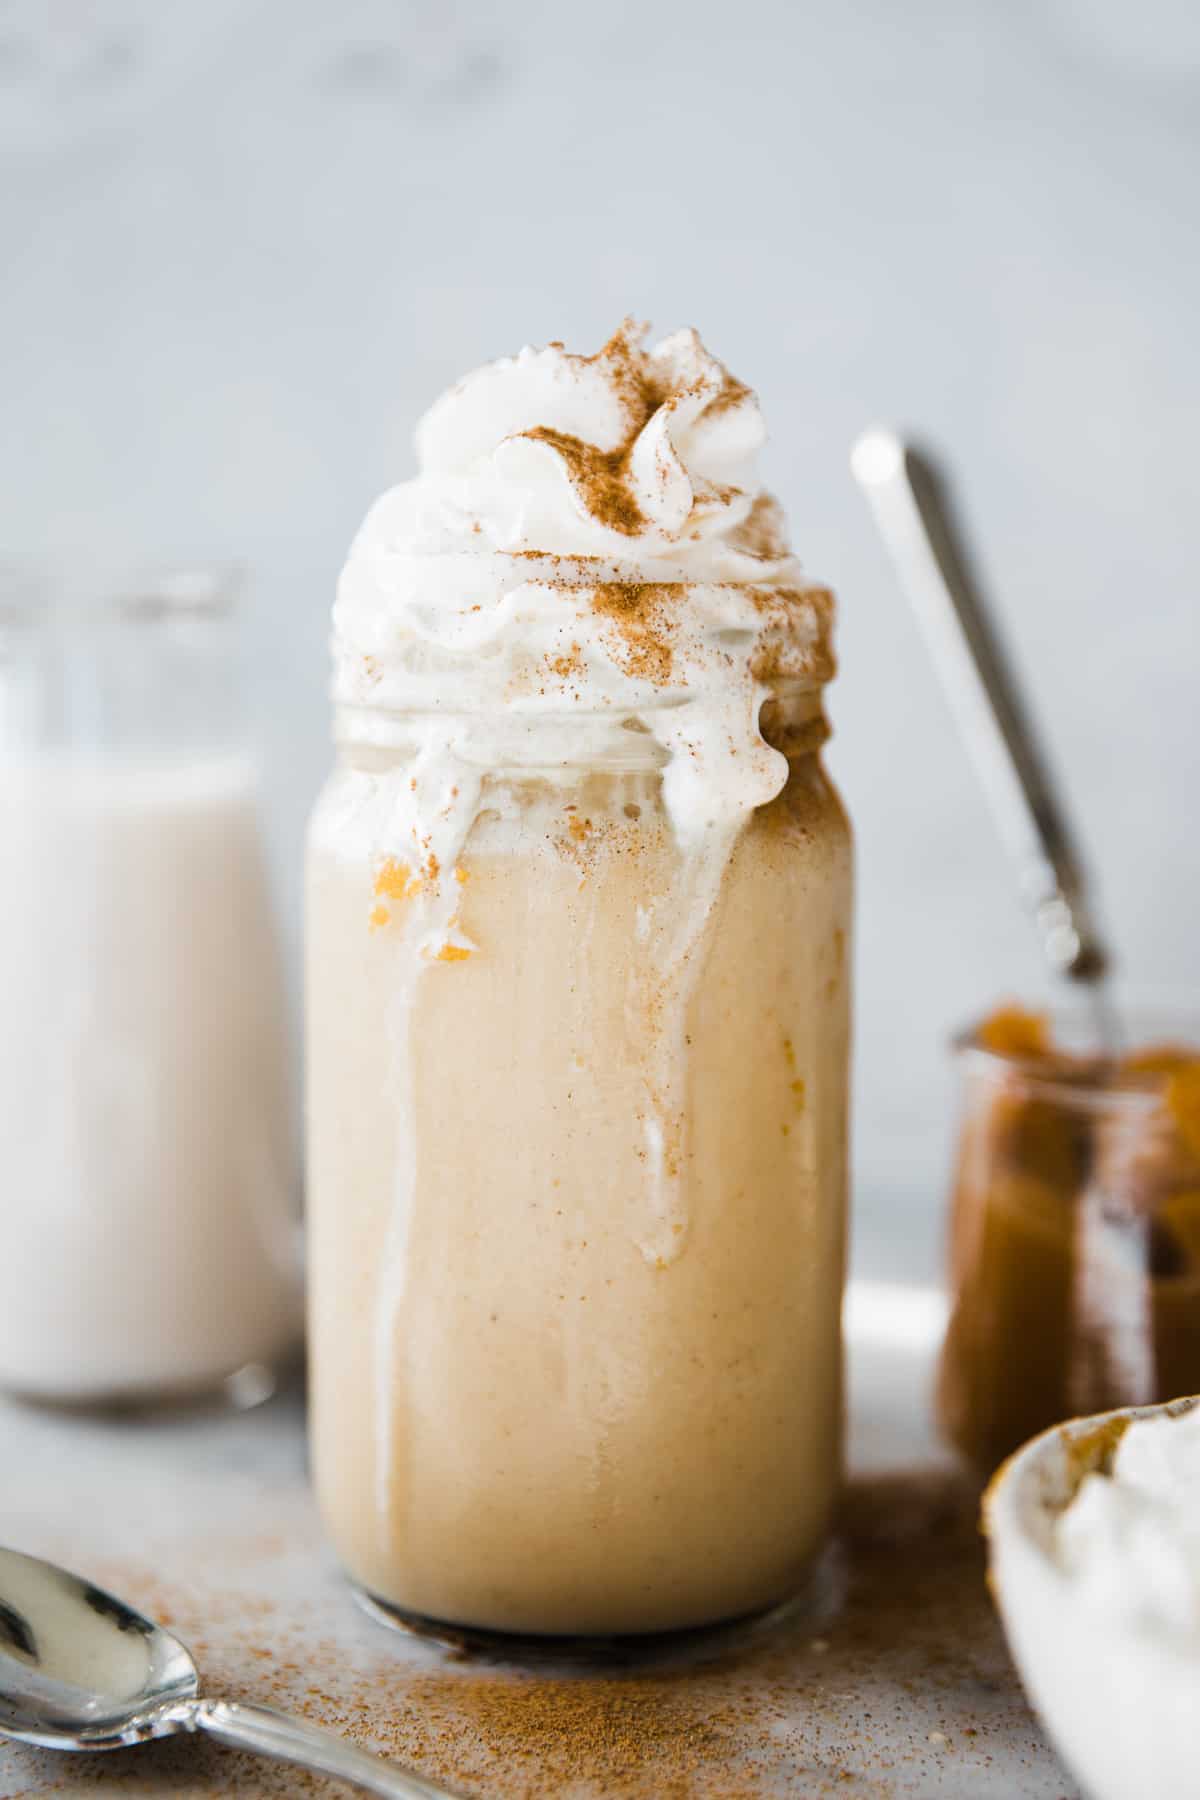 Large glass jar of orange pumpkin smoothie with whip cream and cinnamon topping.